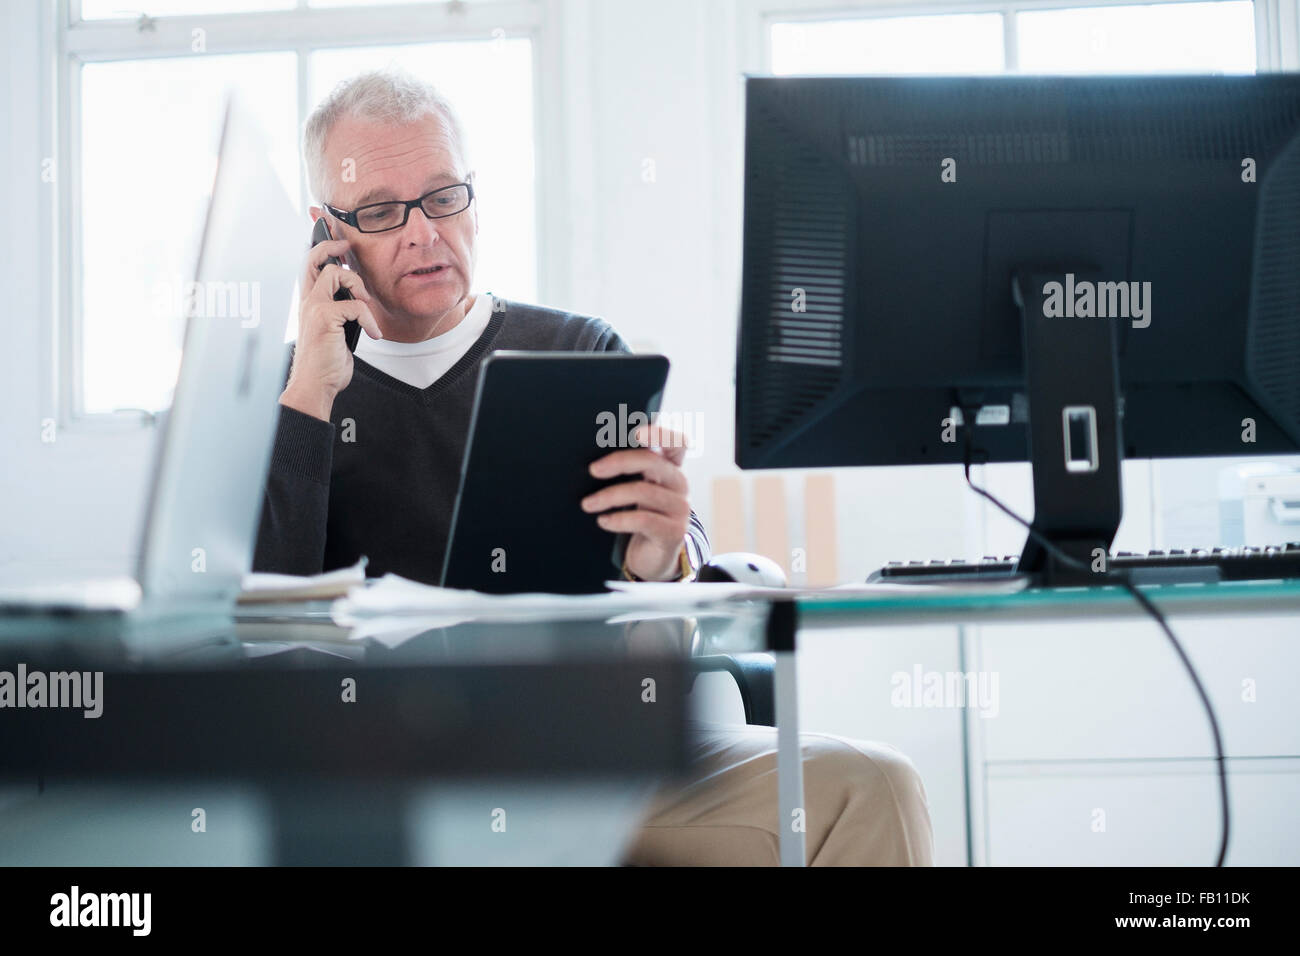 Man in office using smartphone and tablet Stock Photo